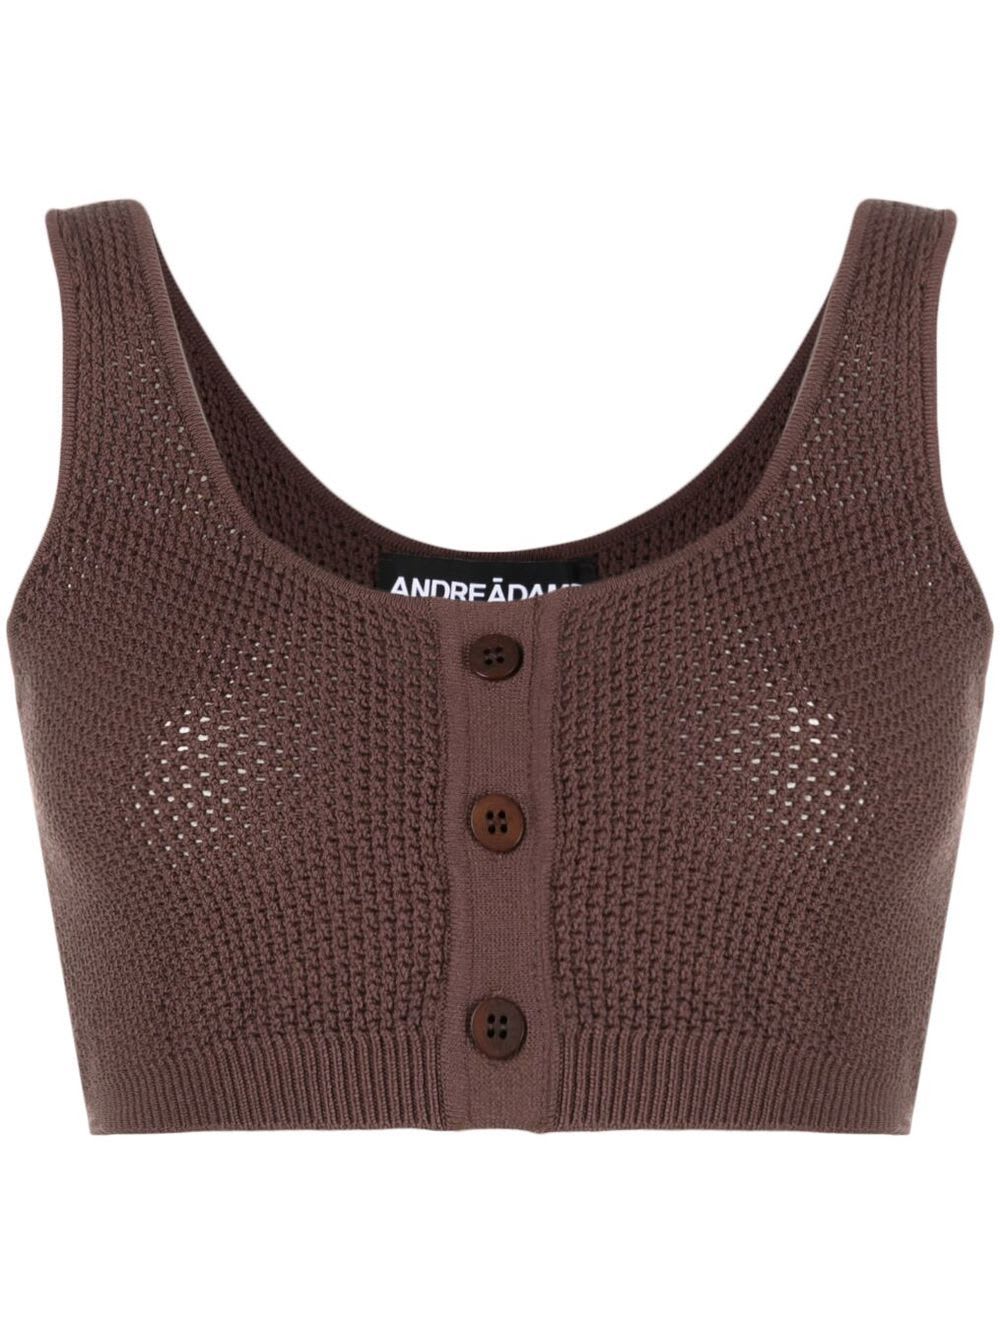 ANDREADAMO Fishnet-knit Top With Buttons